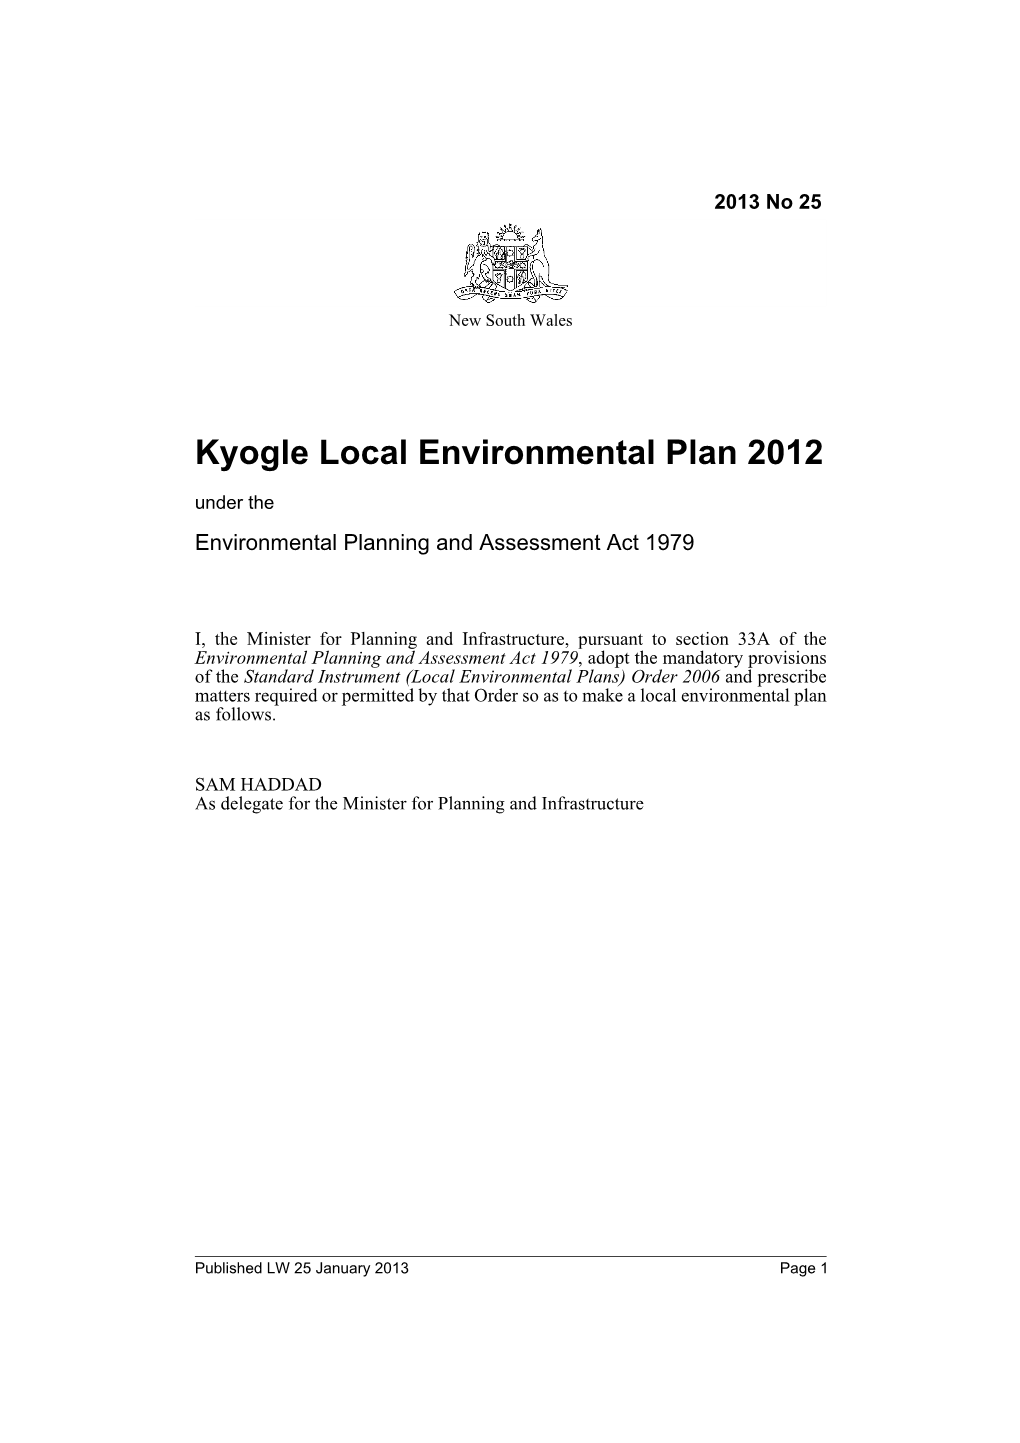 Kyogle Local Environmental Plan 2012 Under the Environmental Planning and Assessment Act 1979